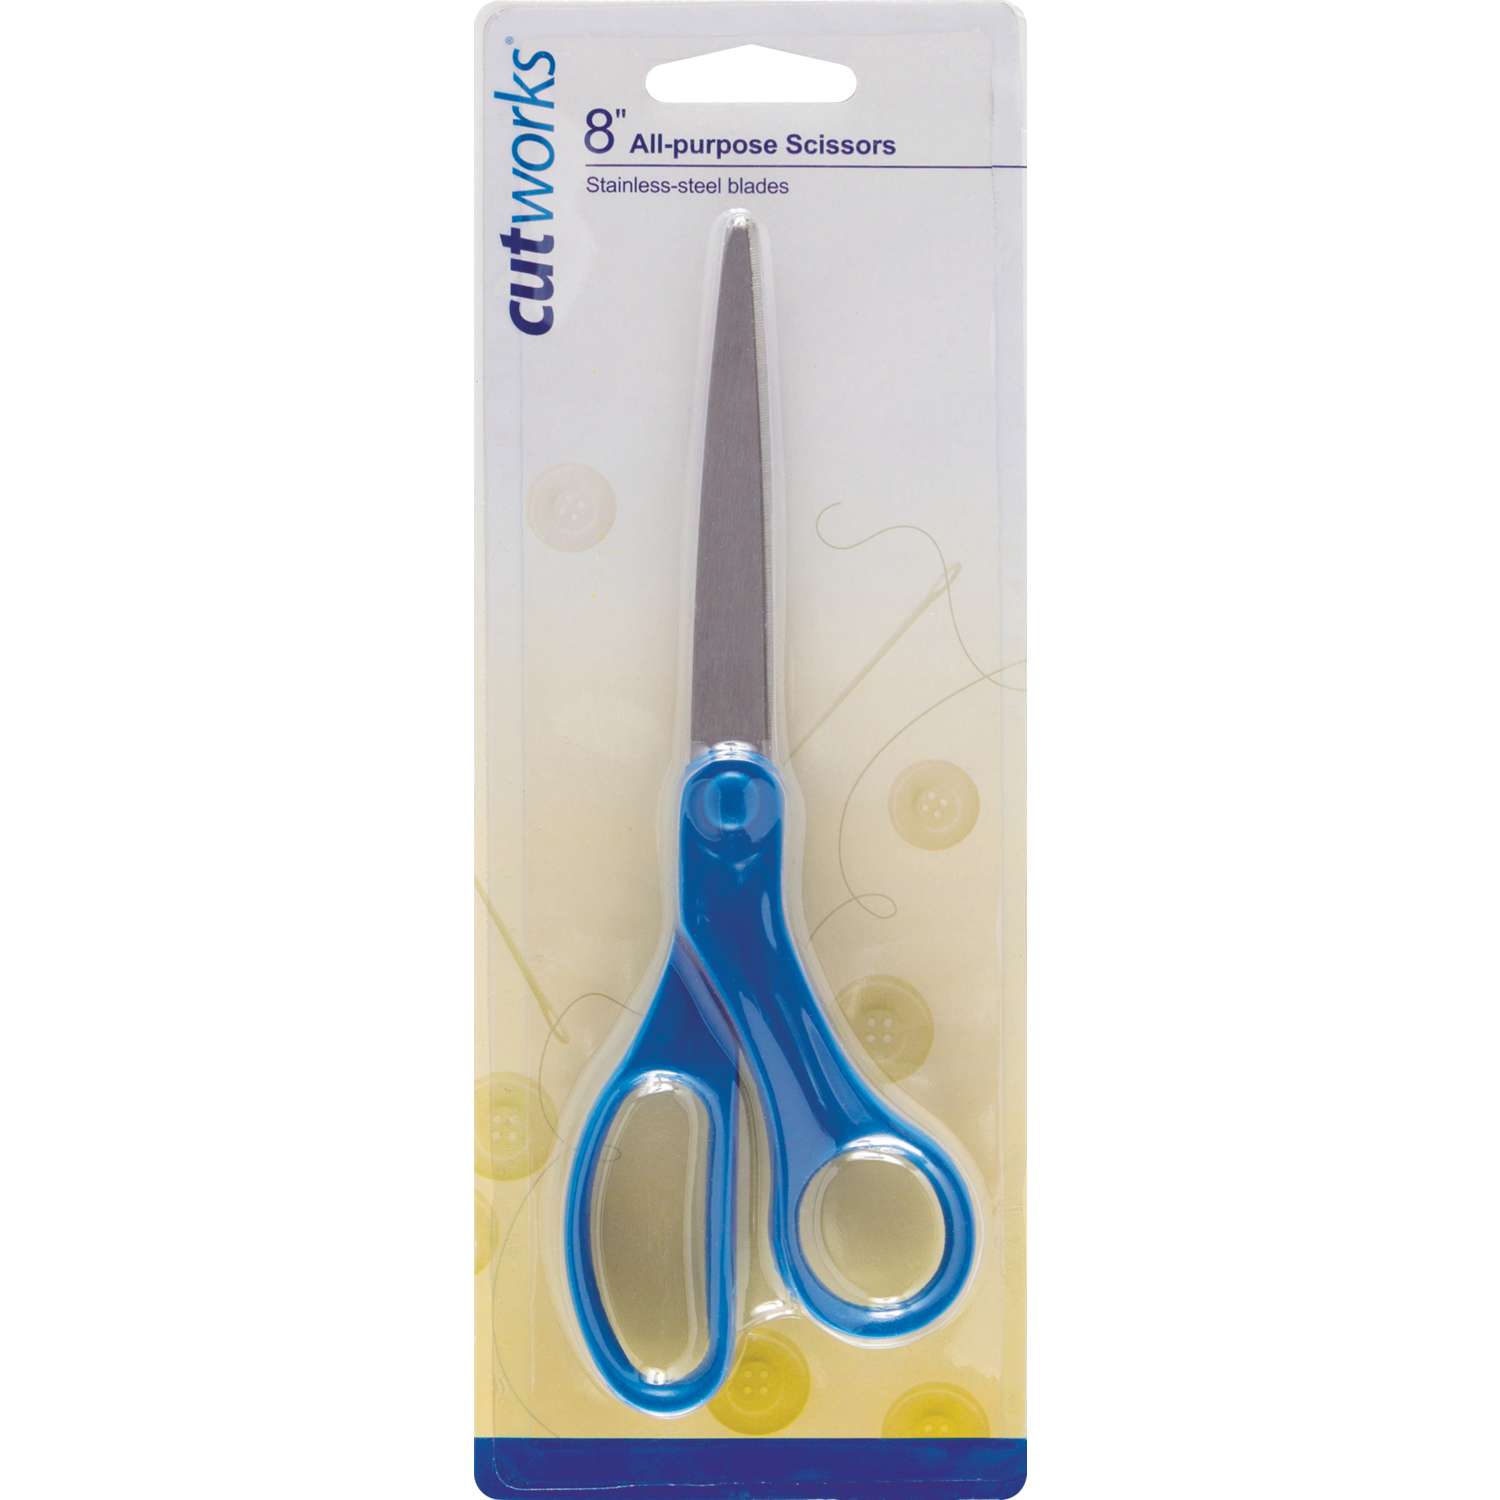 NEW 6" Long Scissor Ace Brand Sewing Shears Crafts Cutting Household Tools 